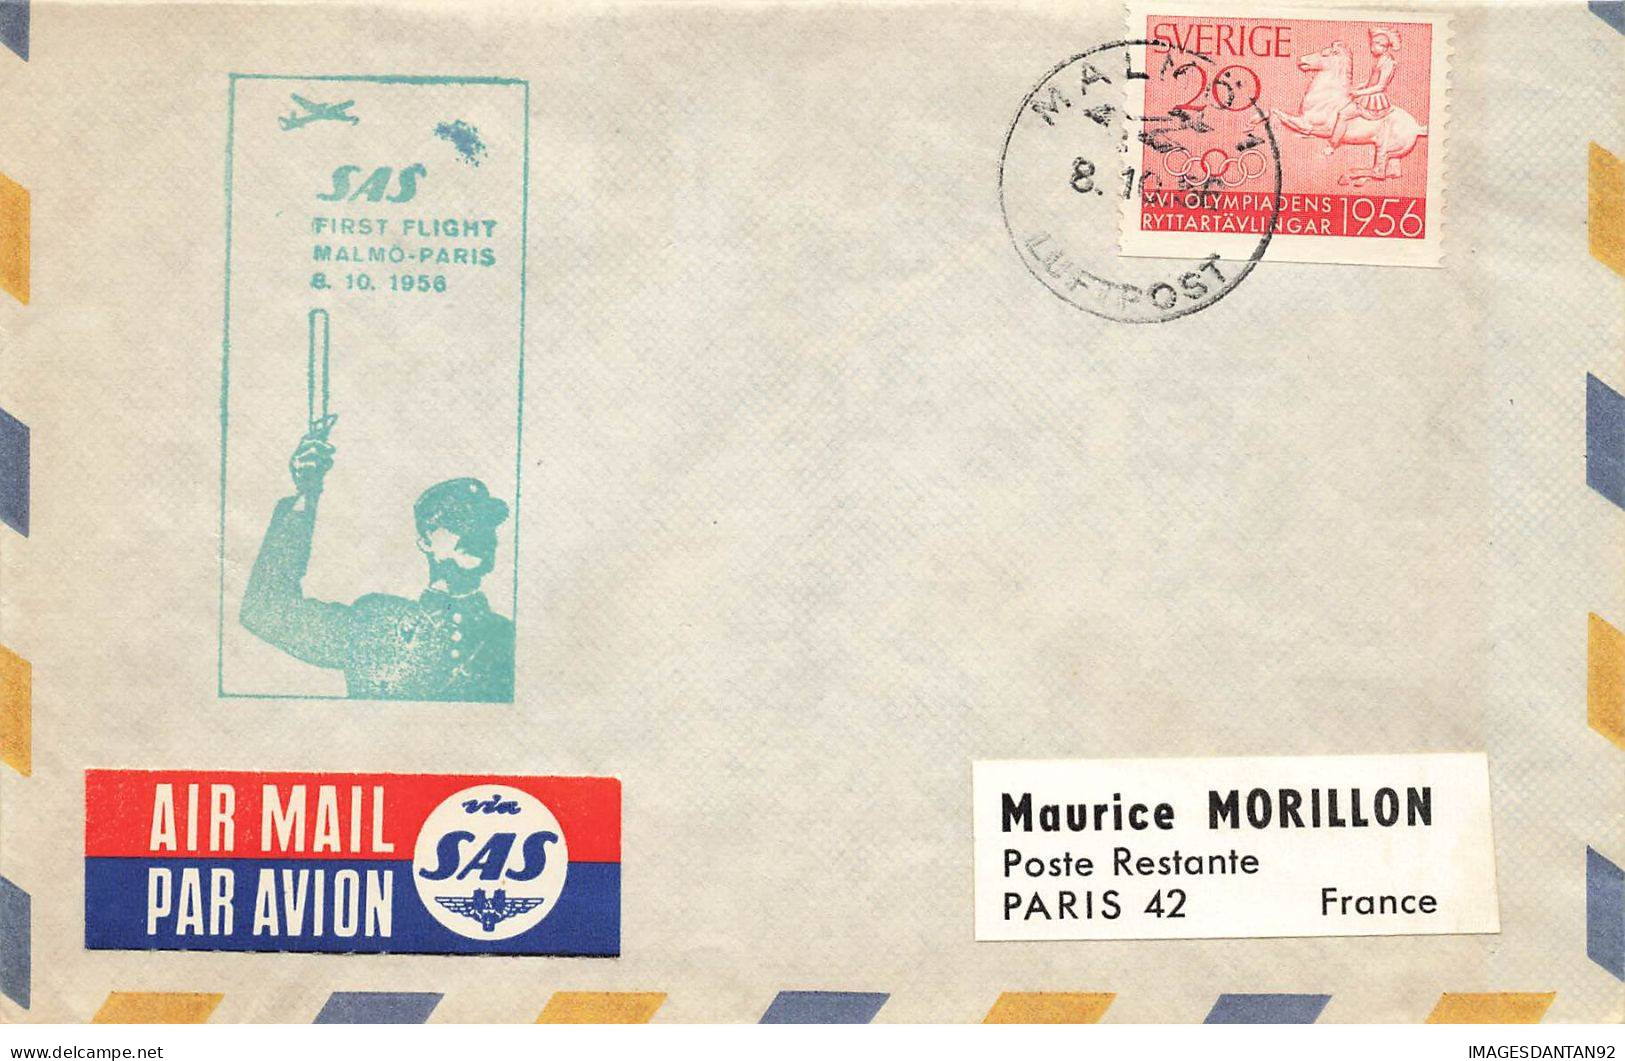 SUEDE #36382 SAS FIRST FLIGHT MALMO PARIS 1958 - Covers & Documents